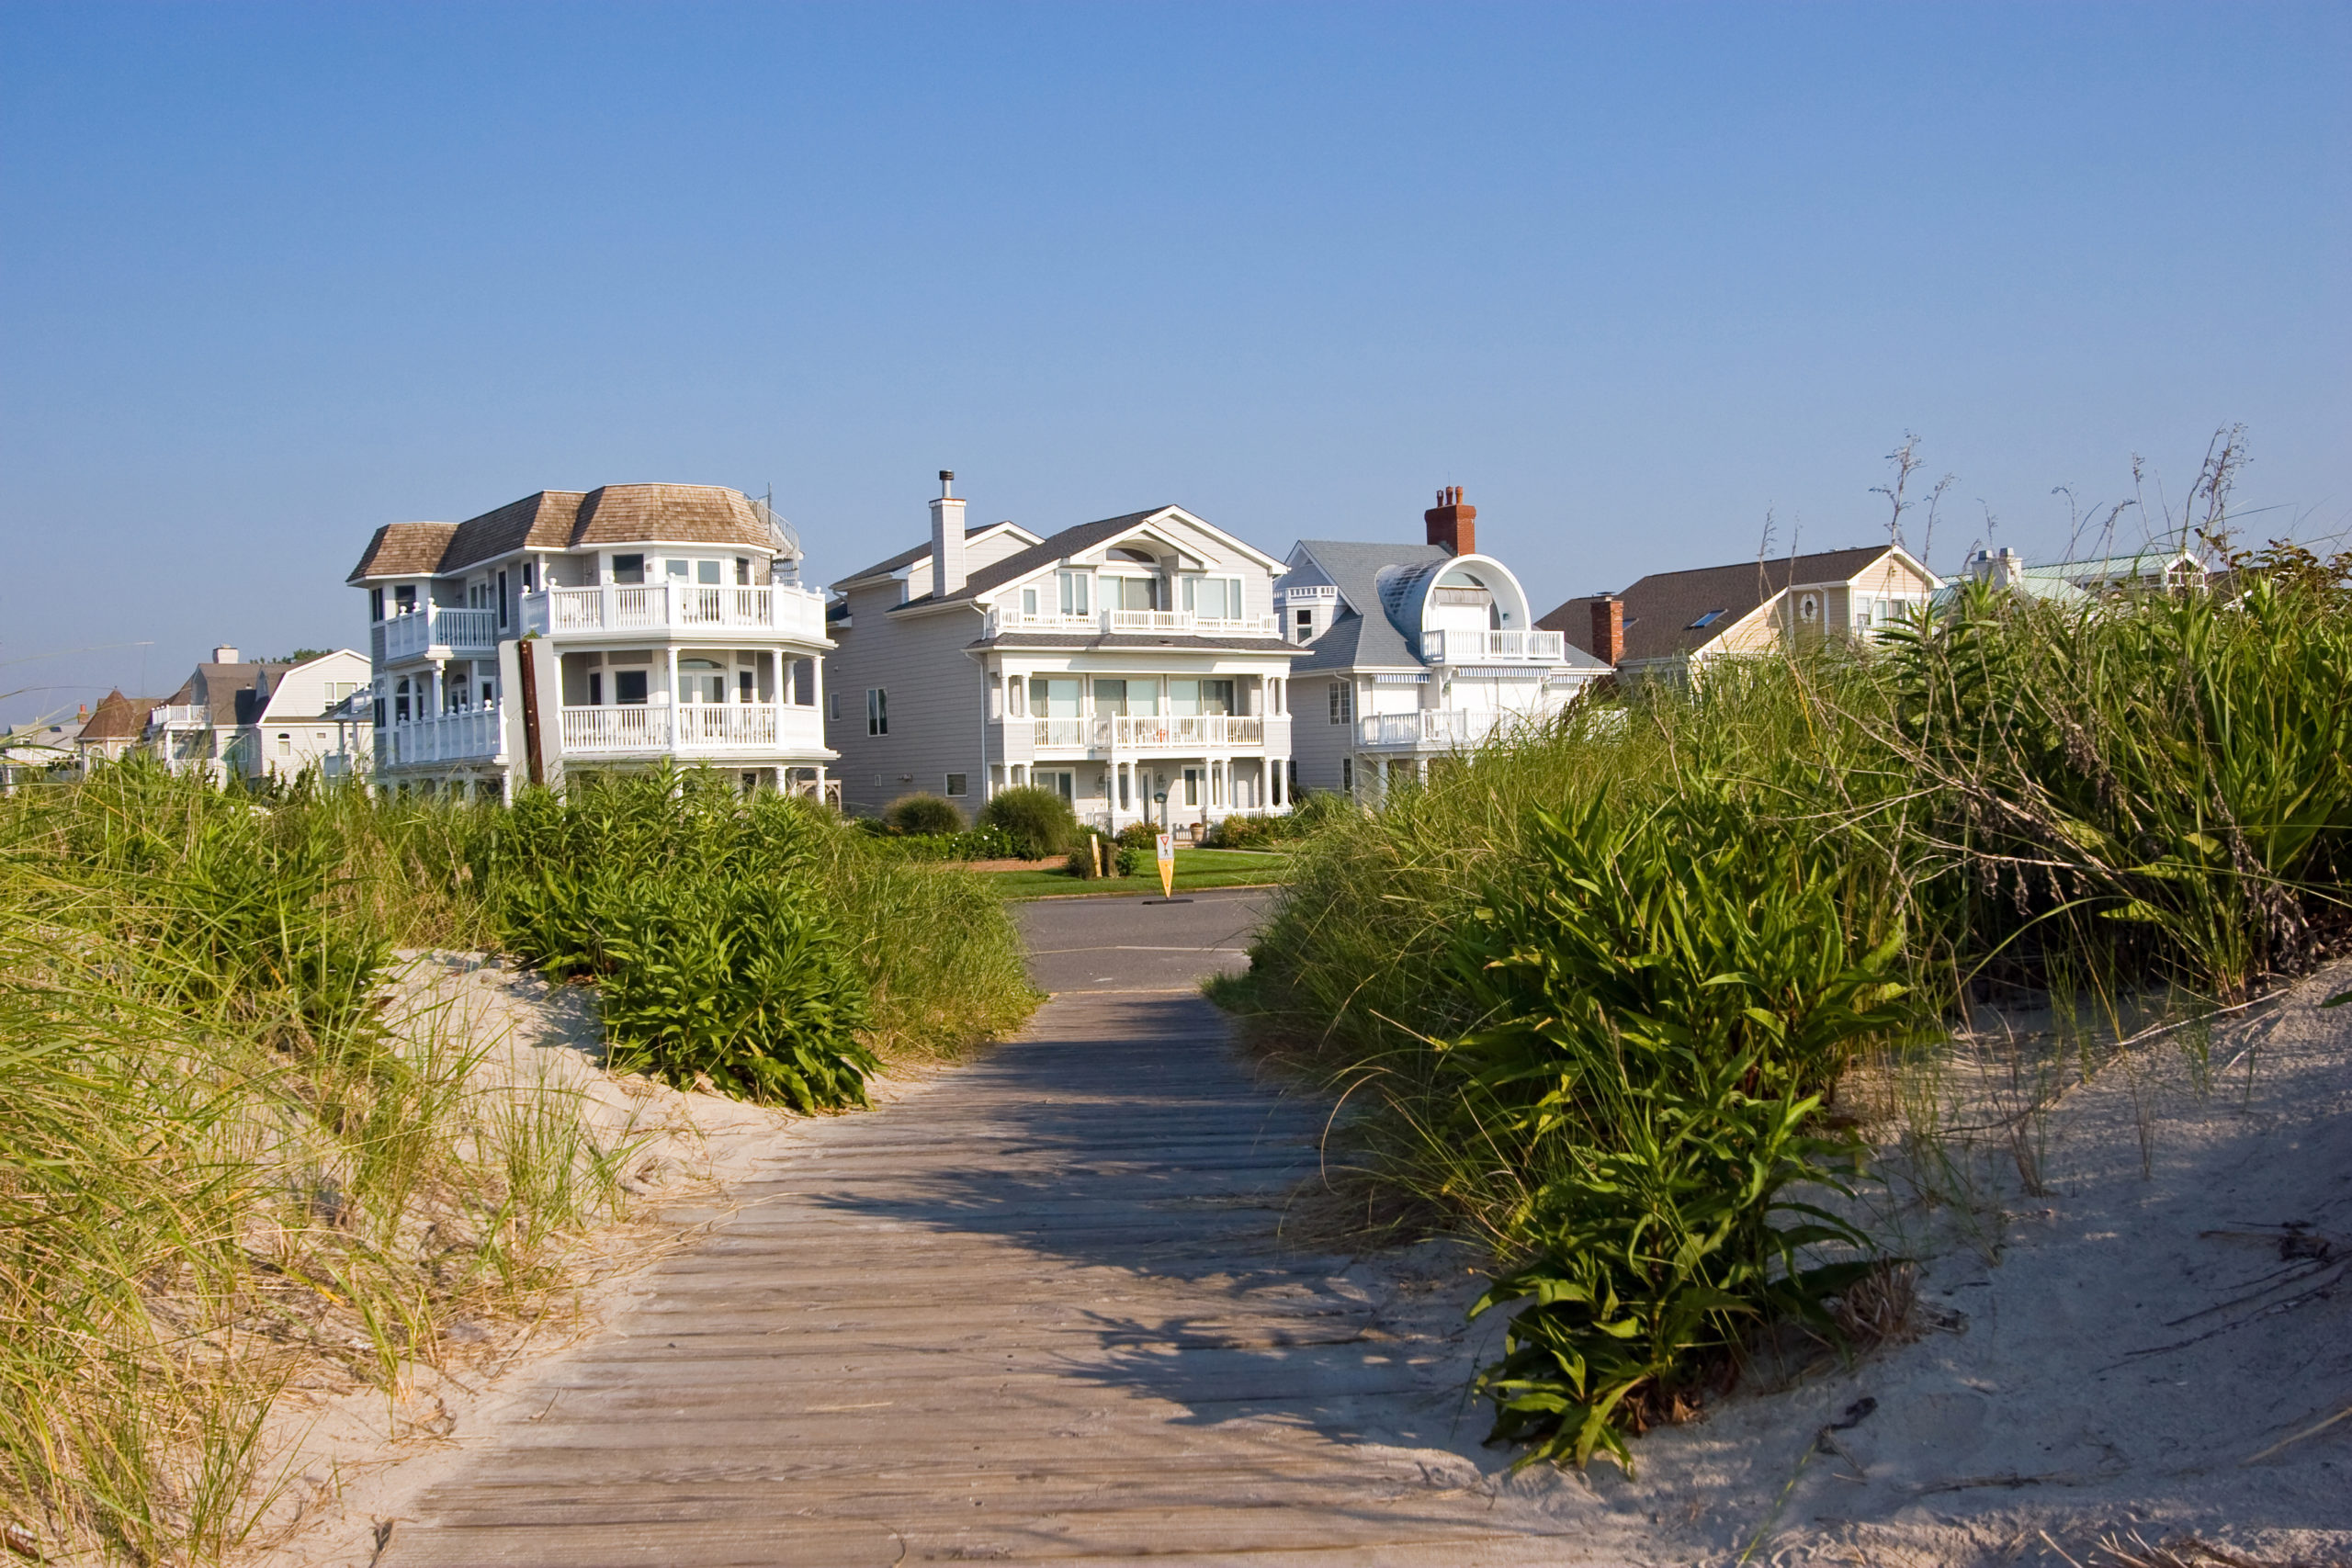 3 TIPS ON FINDING THE PERFECT SUMMER VACATION RENTAL AT THE JERSEY SHORE